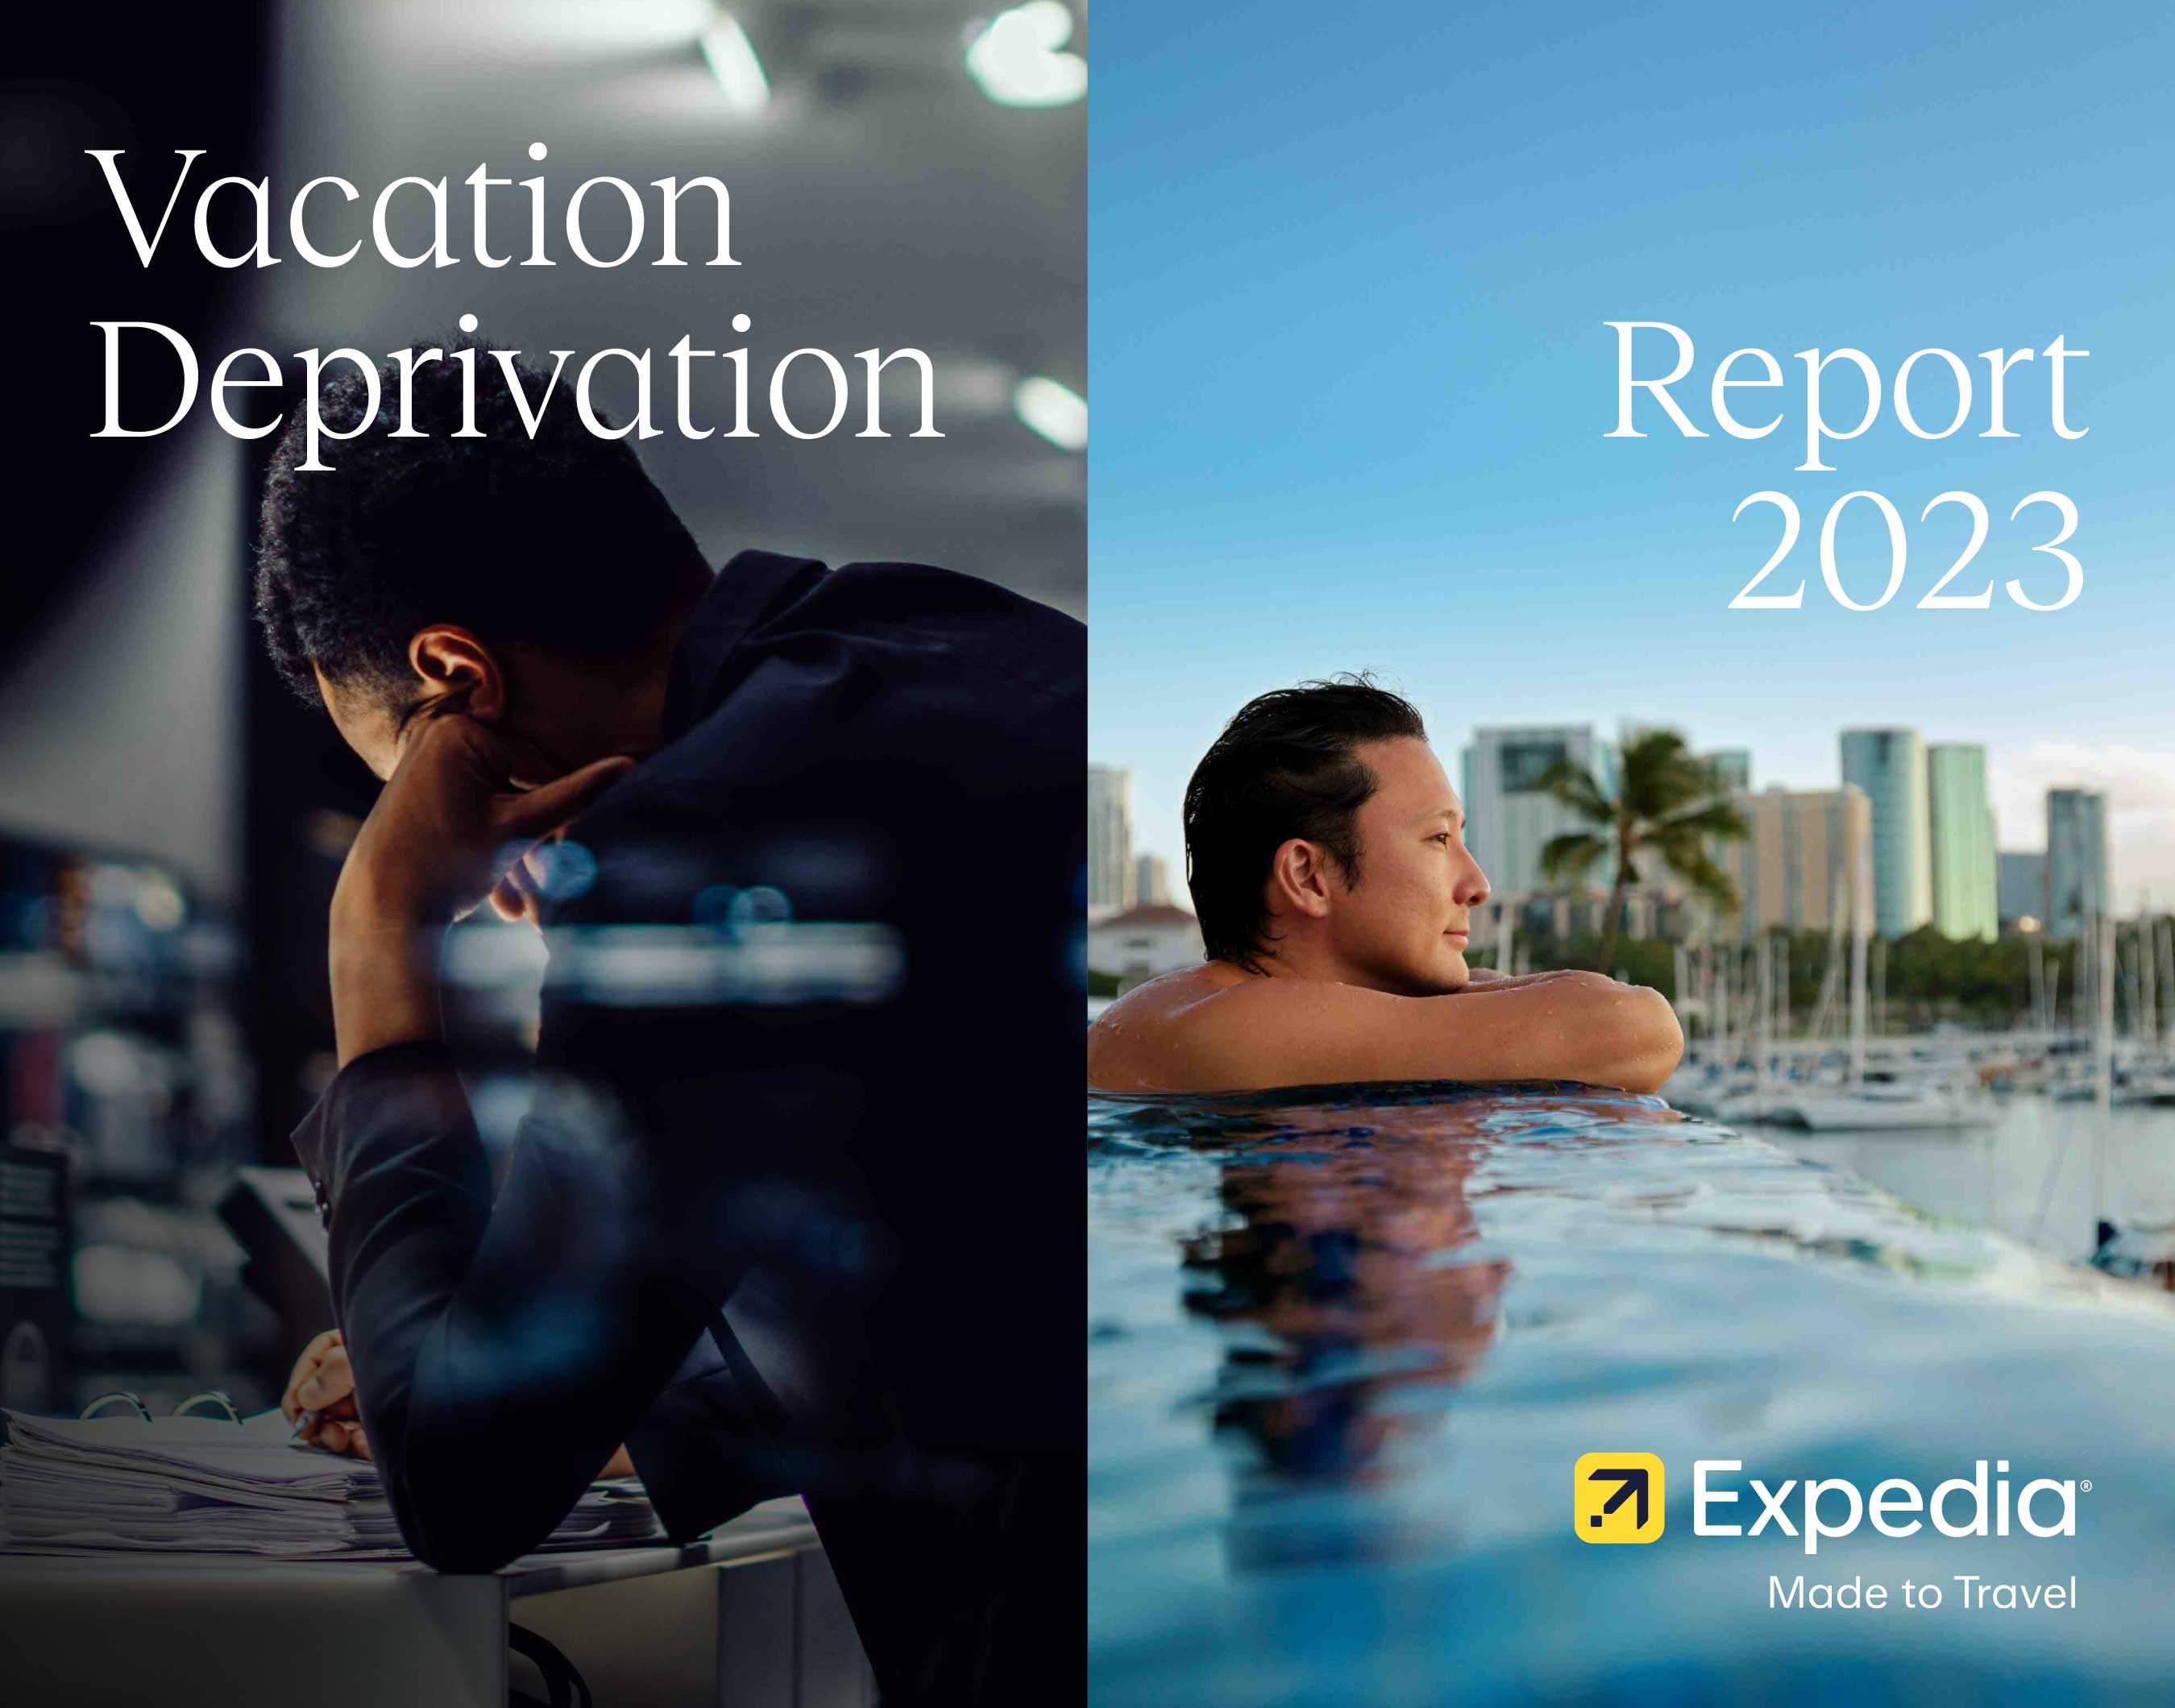 GLOBAL VACATION DEPRIVATION AT A TEN-YEAR HIGH, EXPEDIA REPORTS